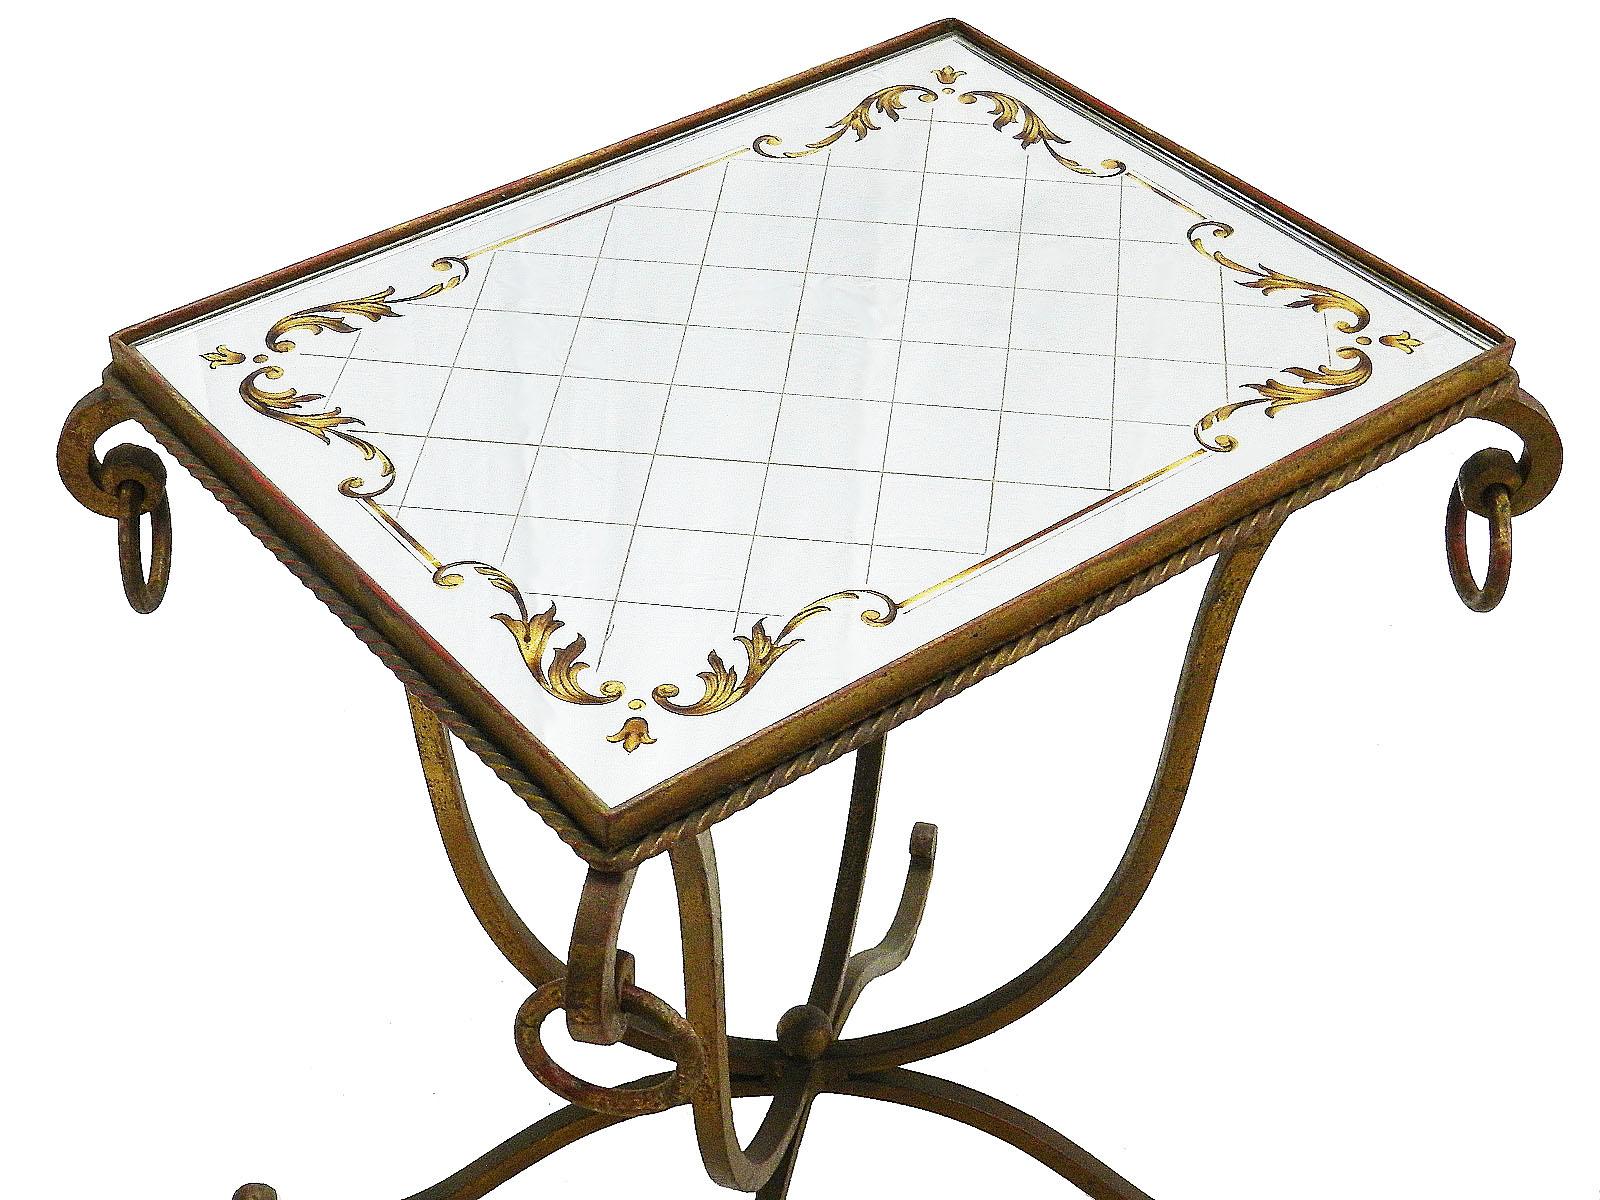 French mirrored table gilded wrought iron midcentury
Art Deco in the manner of Rene Drouet / Jules Leleu
Occasional table with its original patterned mirror top 
A really charming cocktail, coffee or side table
In very good vintage condition with